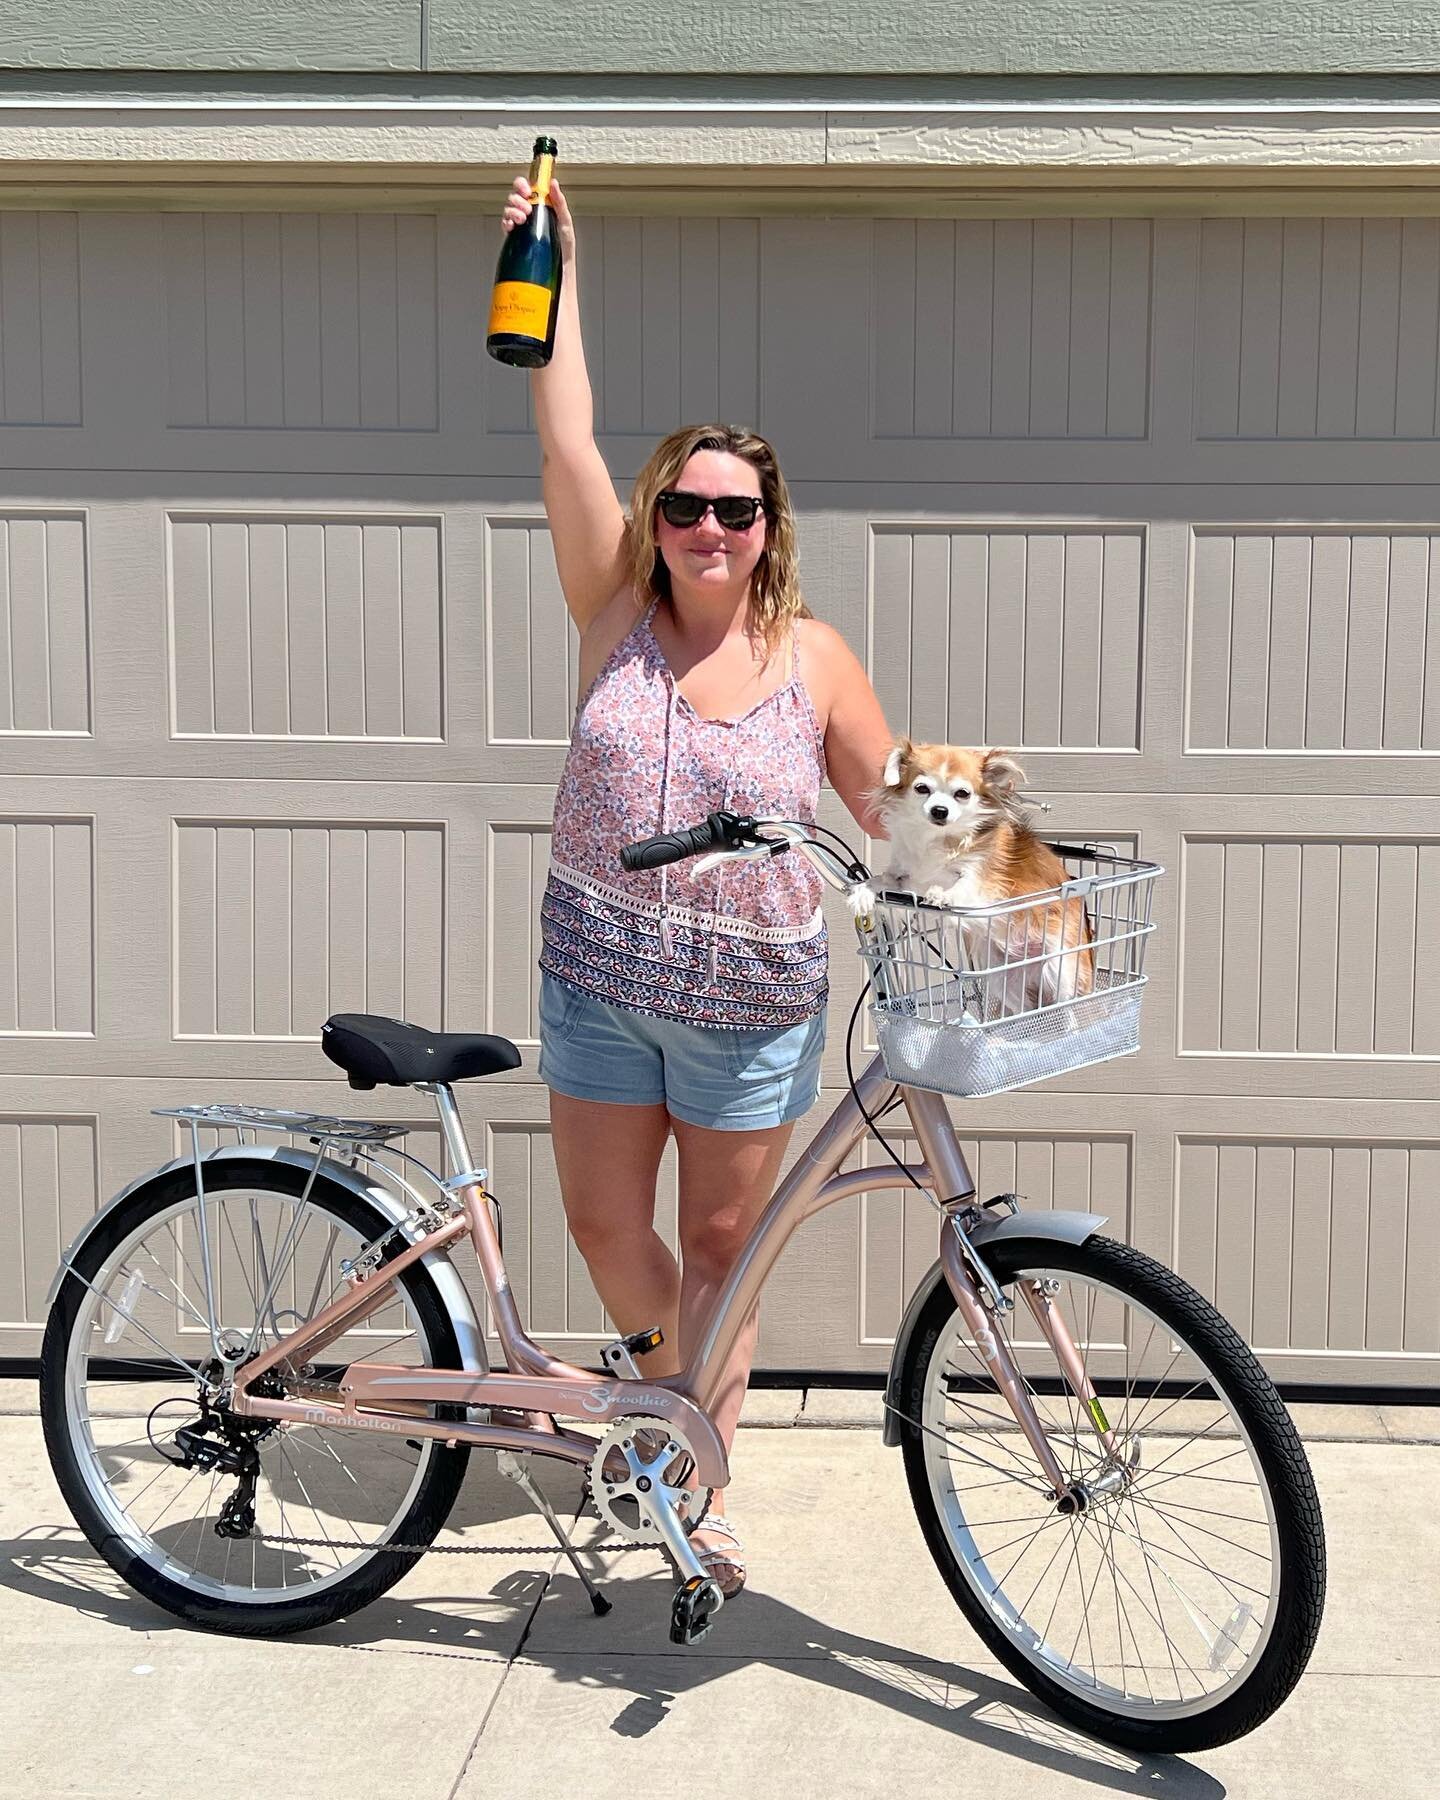 Happy #7spokesnewbikeday -birthday to one of my favorite humans. MY SISTER.  Birthday bike was delivered safe and sound to Sioux Falls. #morewomenonbikes #prettyinpink #birthdaybike #sisterlove #sisters Taylor the chihuahua approved #chihuahuasofinst